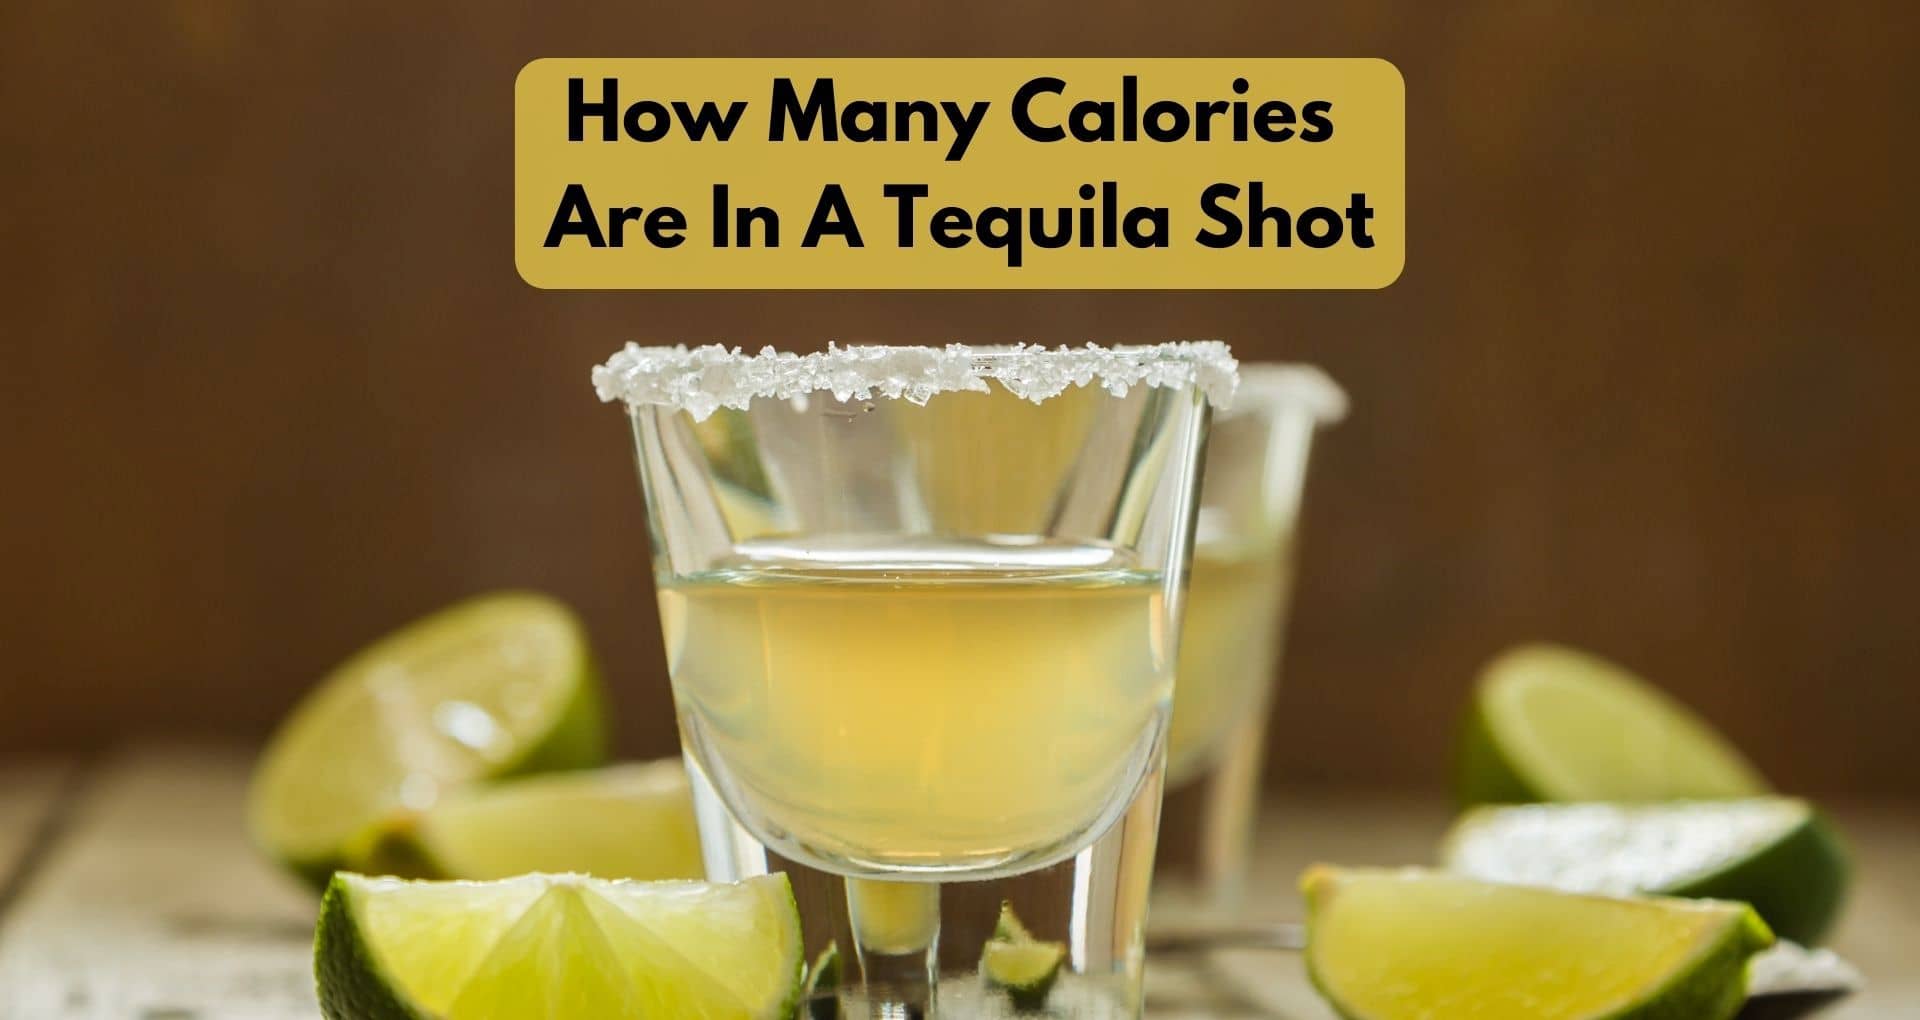 How Many Calories Are In A Tequila Shot?